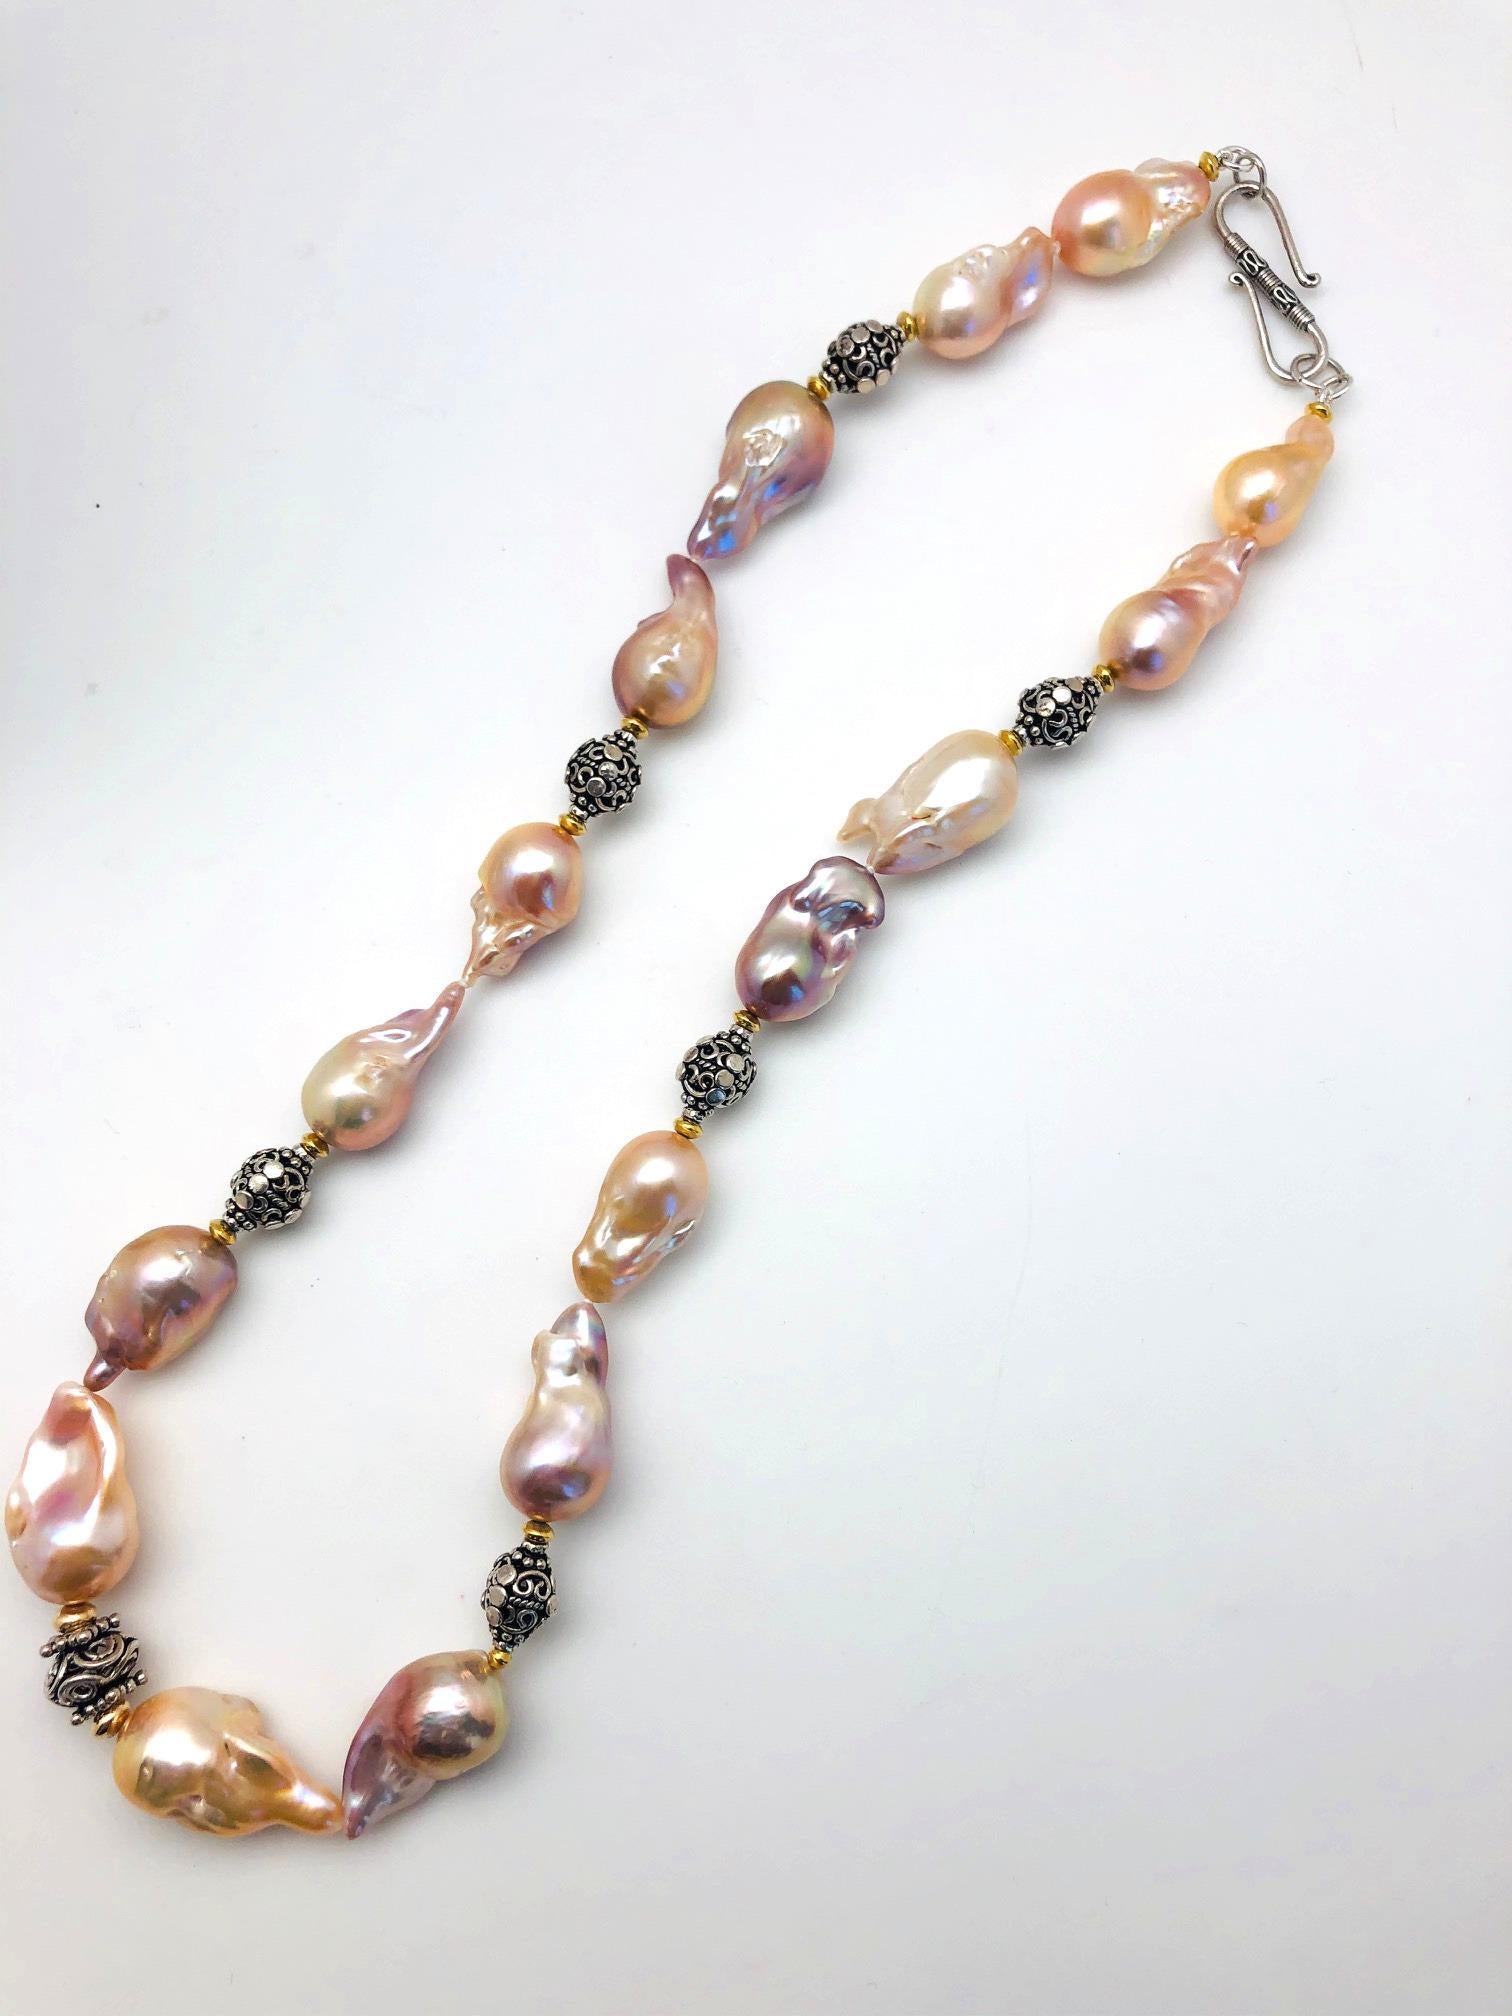 This beautiful strand of pearls is impressive! The large iridescent cream colored pearls have excellent luster and possess gorgeous rose and golden overtones. The individual baroque (freeform) pearls measure approximately 3/4